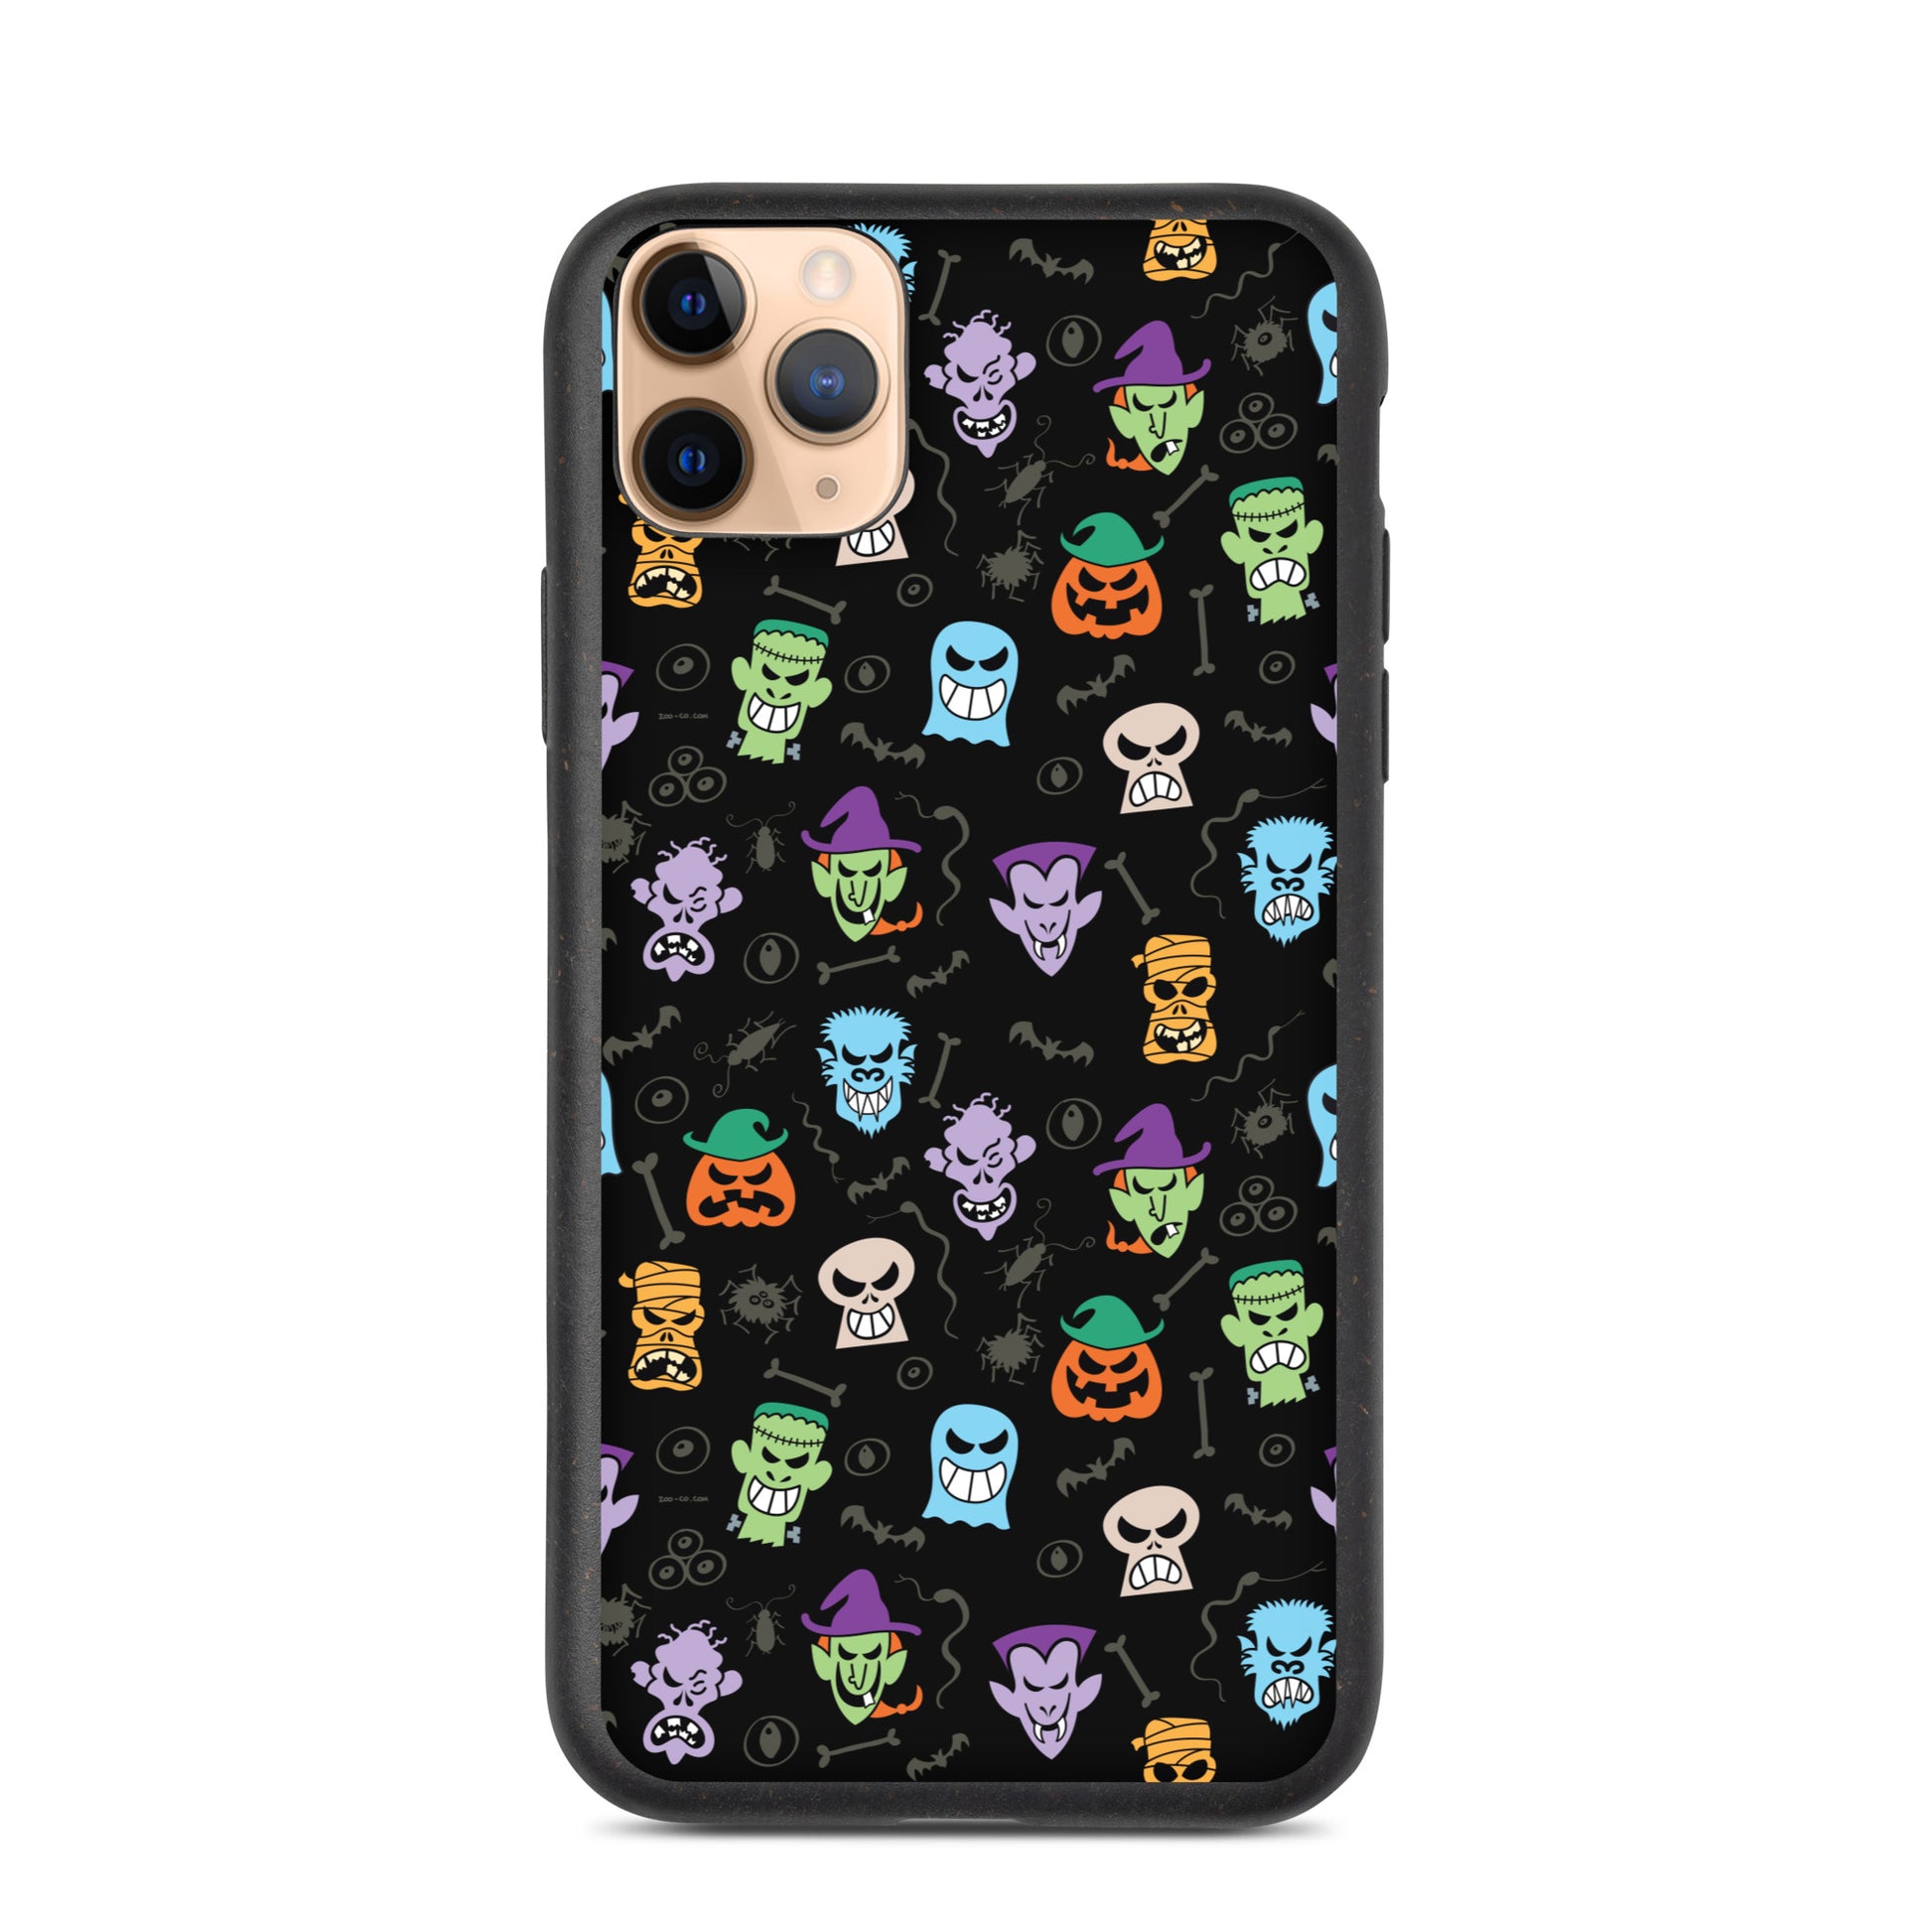 Scary Halloween faces Speckled iPhone case. iPhone 11 pro max